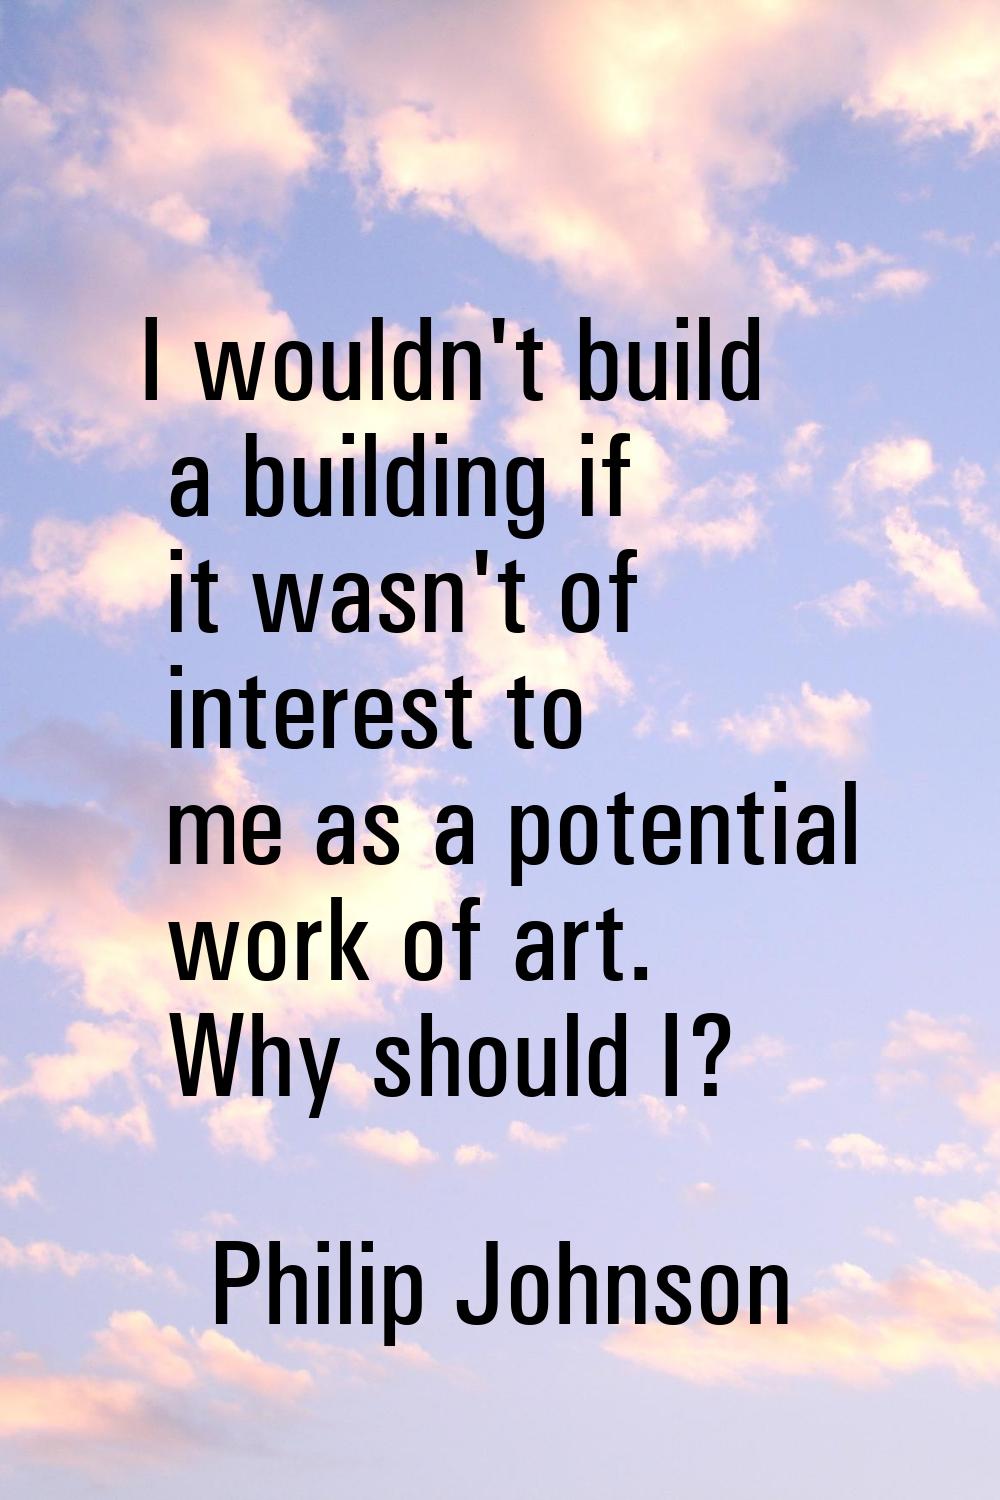 I wouldn't build a building if it wasn't of interest to me as a potential work of art. Why should I